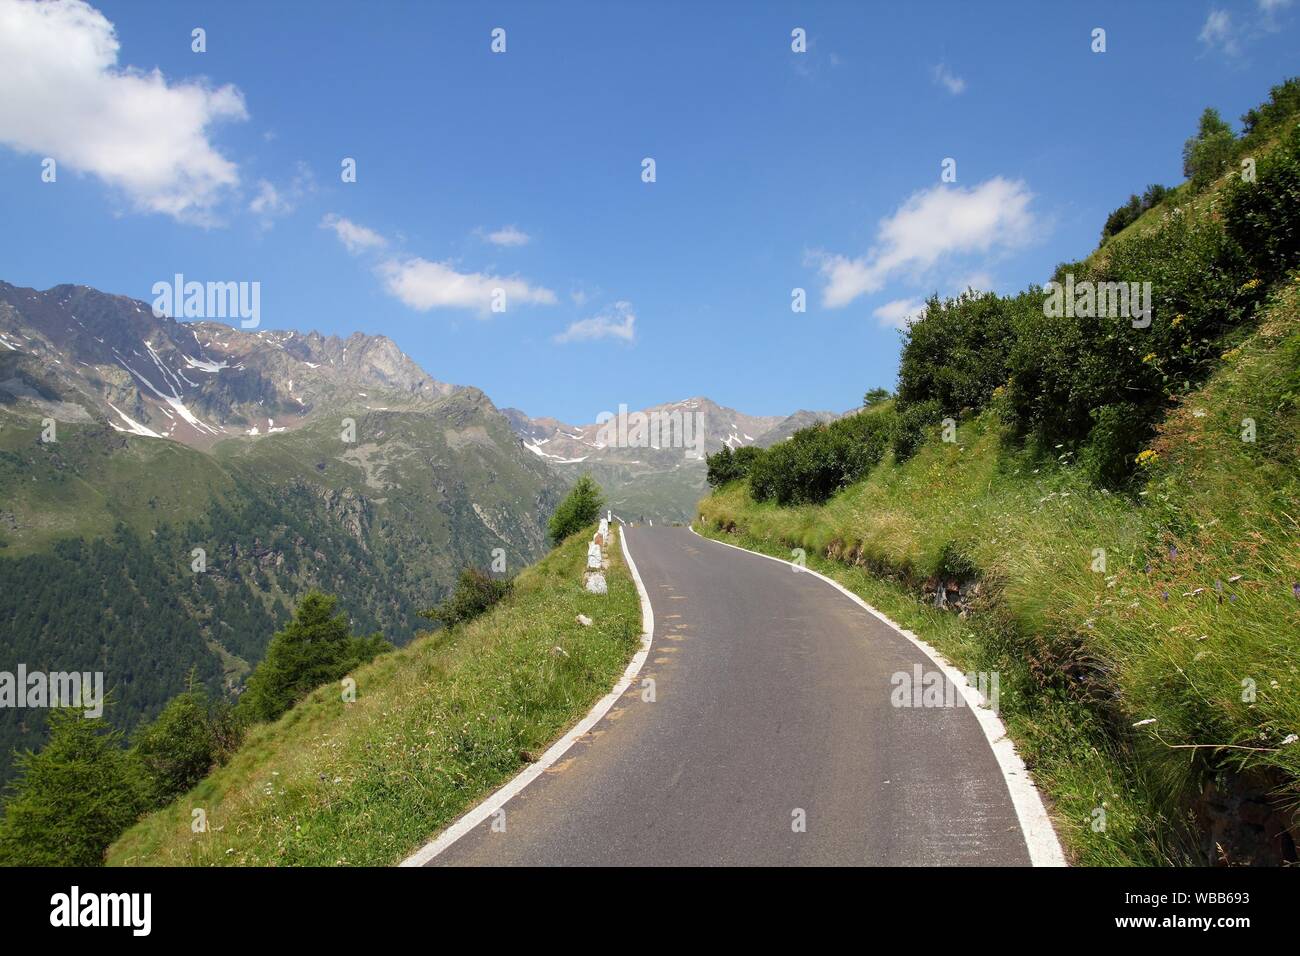 Italy, Stelvio National Park. Famous road to Gavia Pass in Ortler Alps. Alpine landscape. Stock Photo